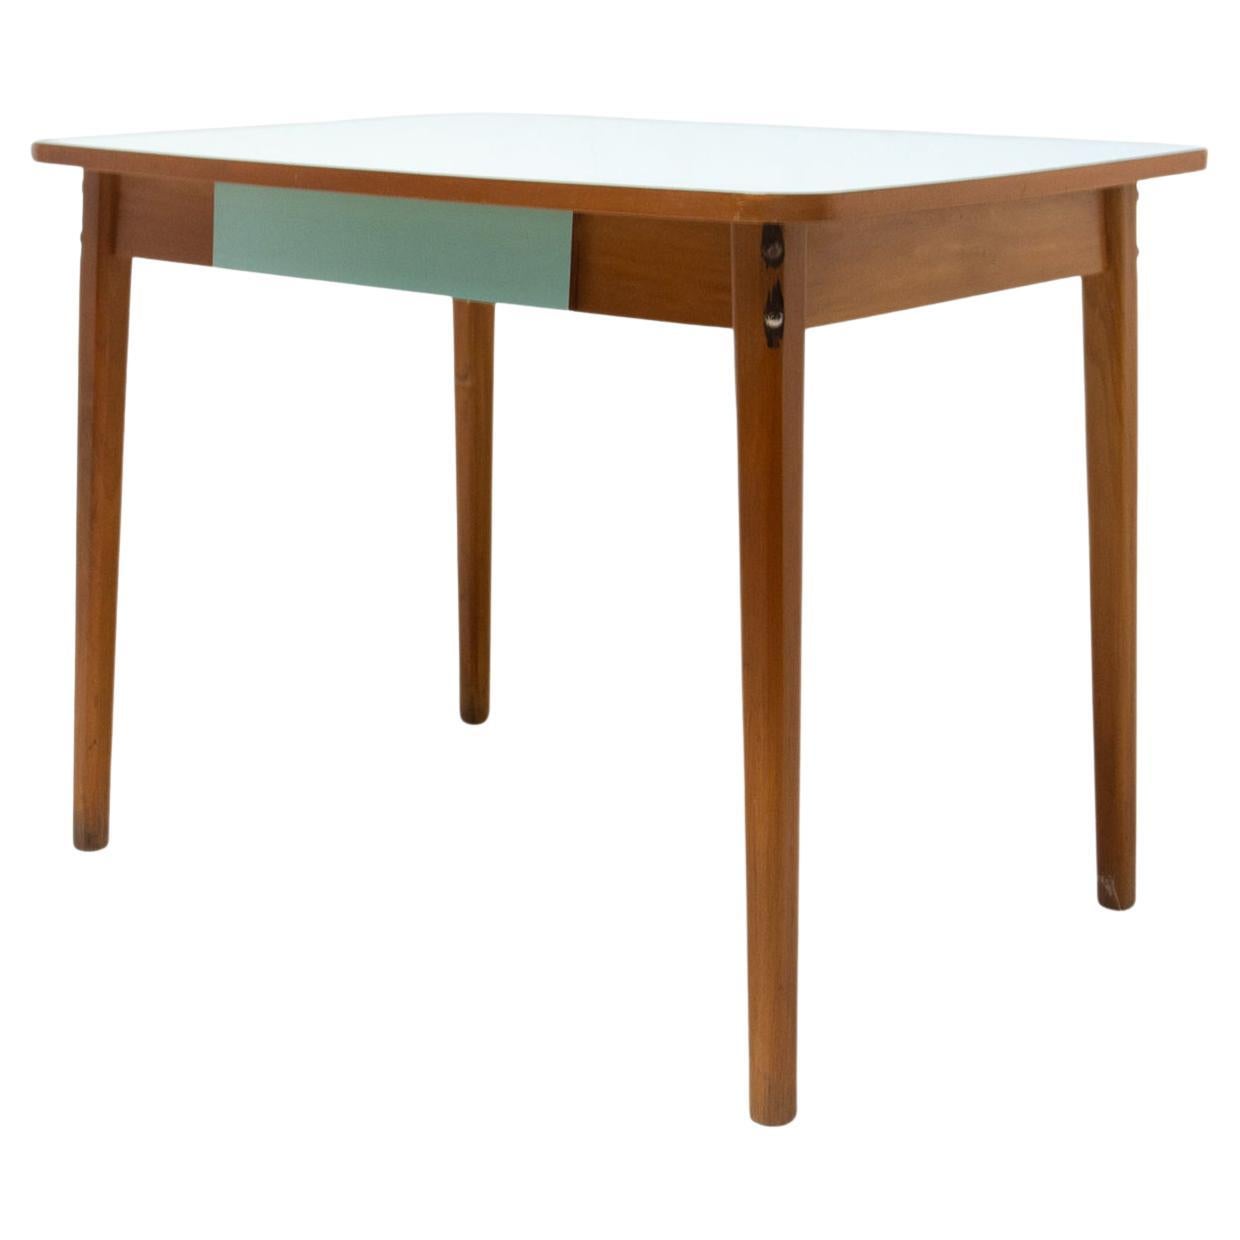 Midcentury Formica and Wood Central Table, Czechoslovakia, 1960´s